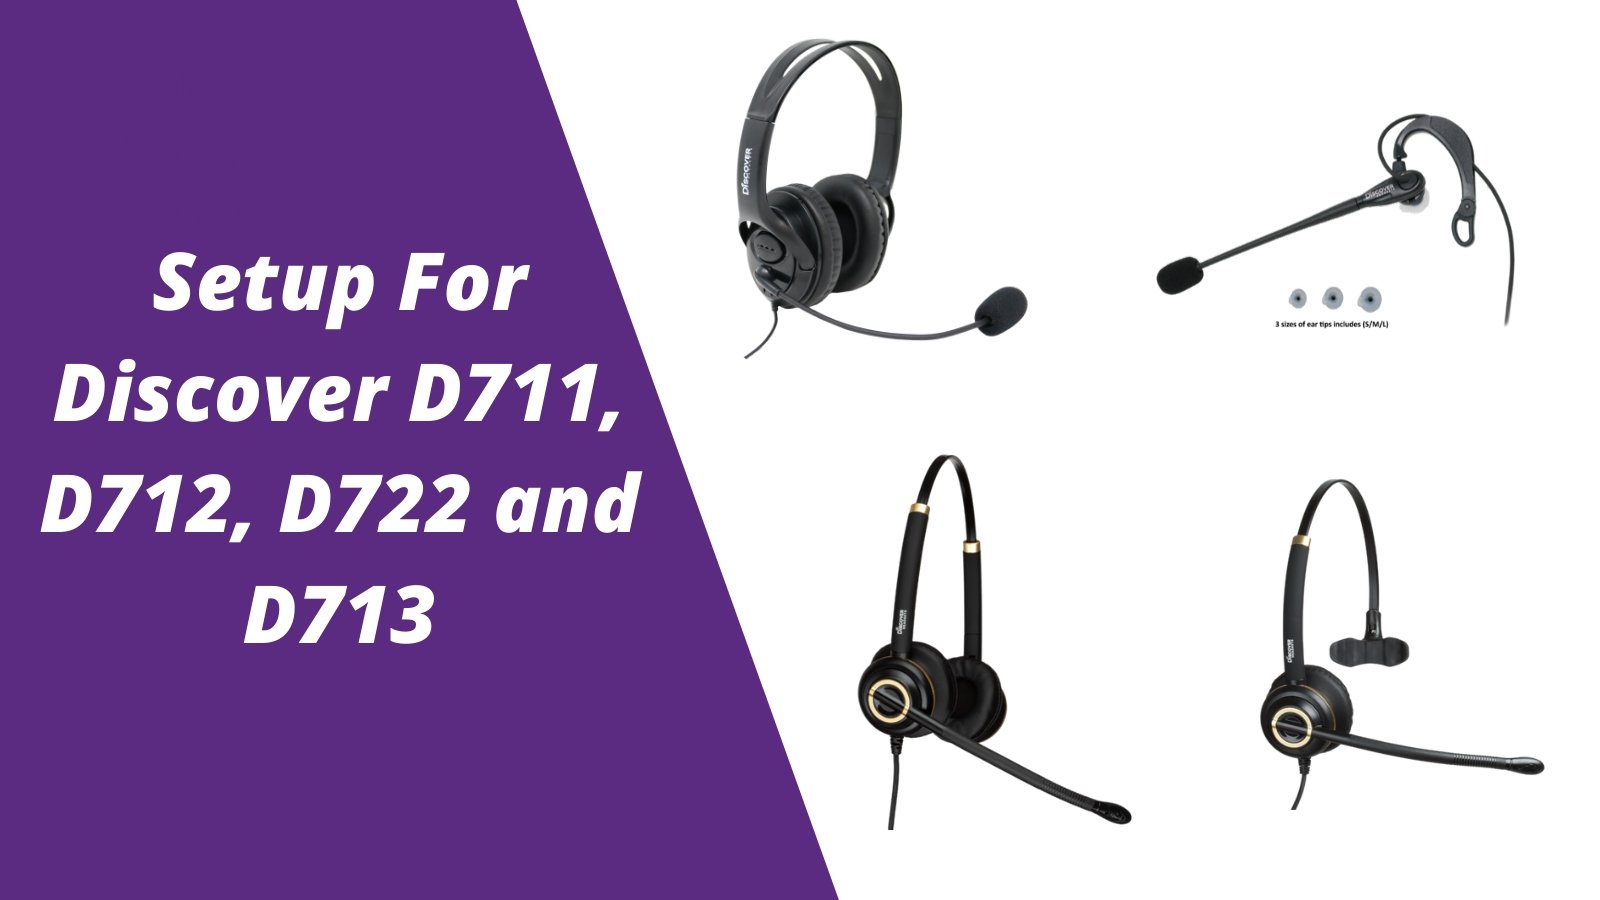 Setup Guide For Discover D711, D712, D722 and D713 - Headset Advisor